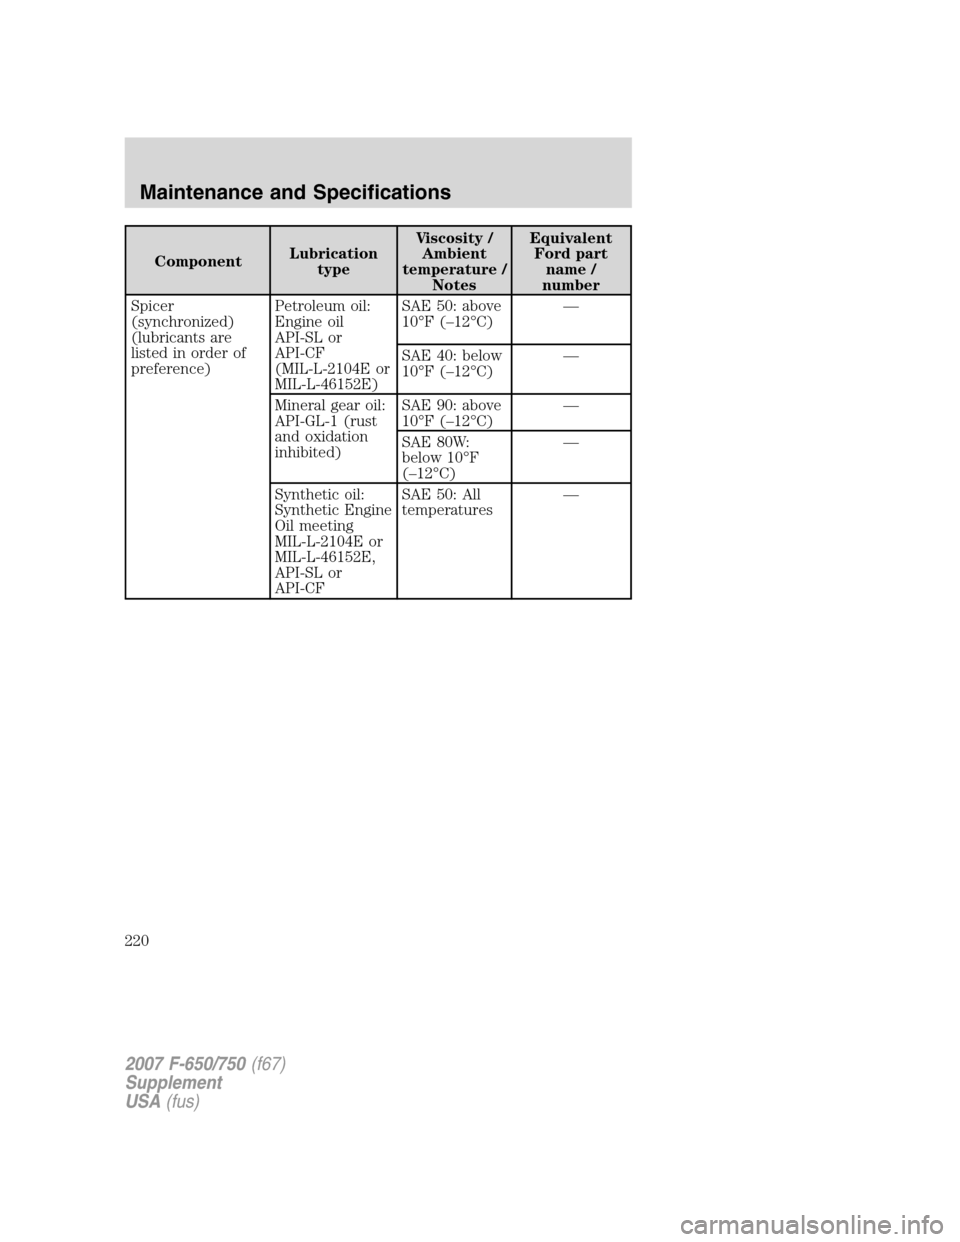 FORD F750 2007 11.G Owners Manual ComponentLubrication
typeViscosity /
Ambient
temperature /
NotesEquivalent
Ford part
name /
number
Spicer
(synchronized)
(lubricants are
listed in order of
preference)Petroleum oil:
Engine oil
API-SL 